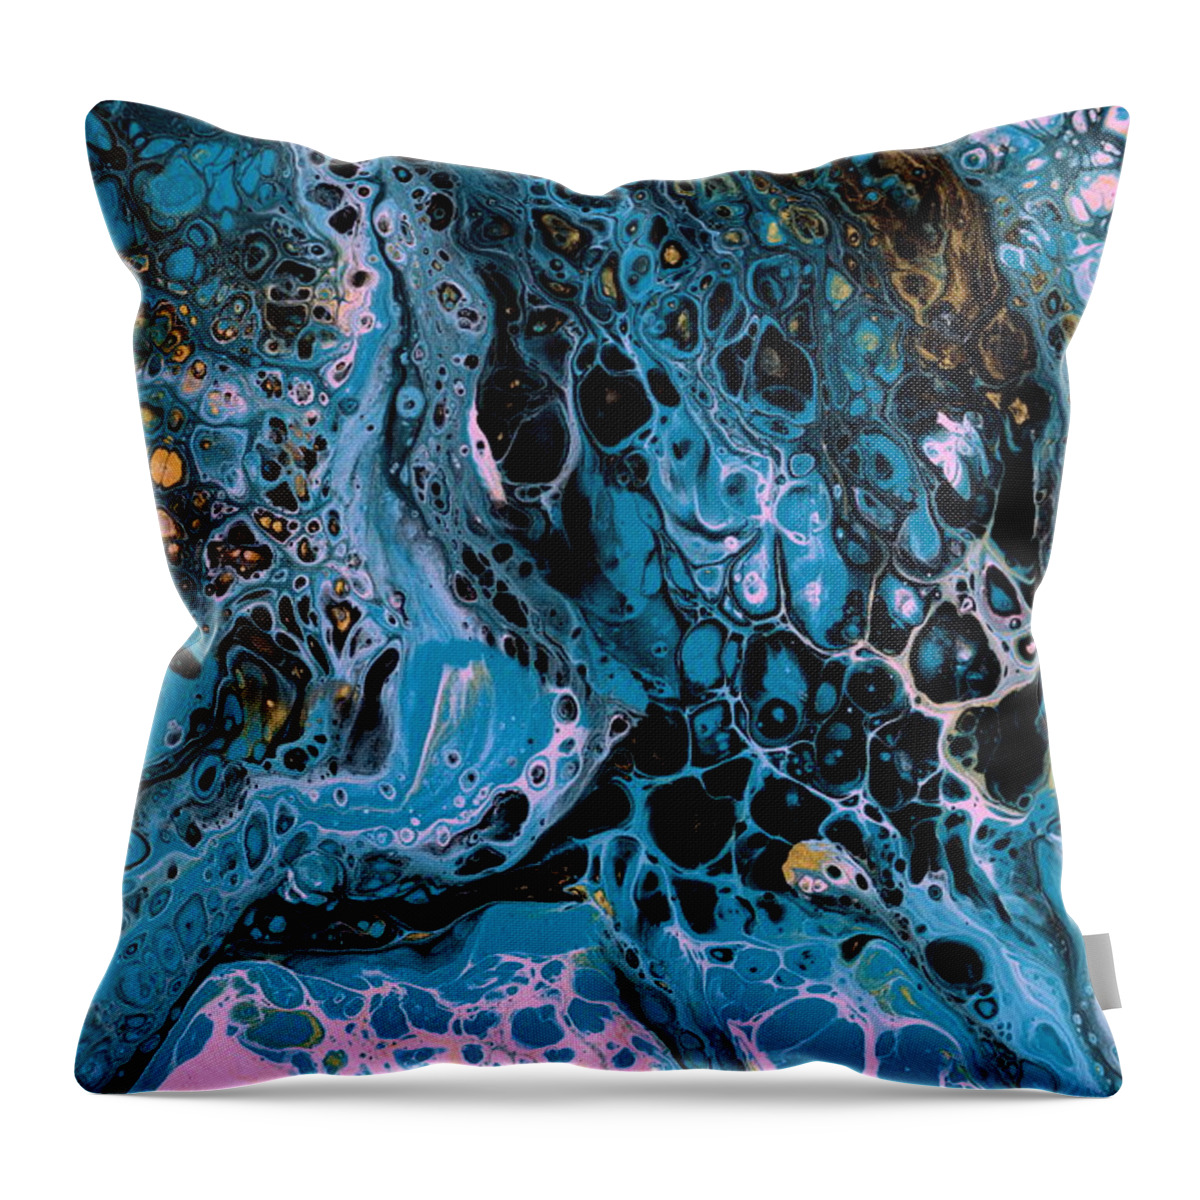 Acrylic Pouring Throw Pillow featuring the painting Forever by Marionette Taboniar